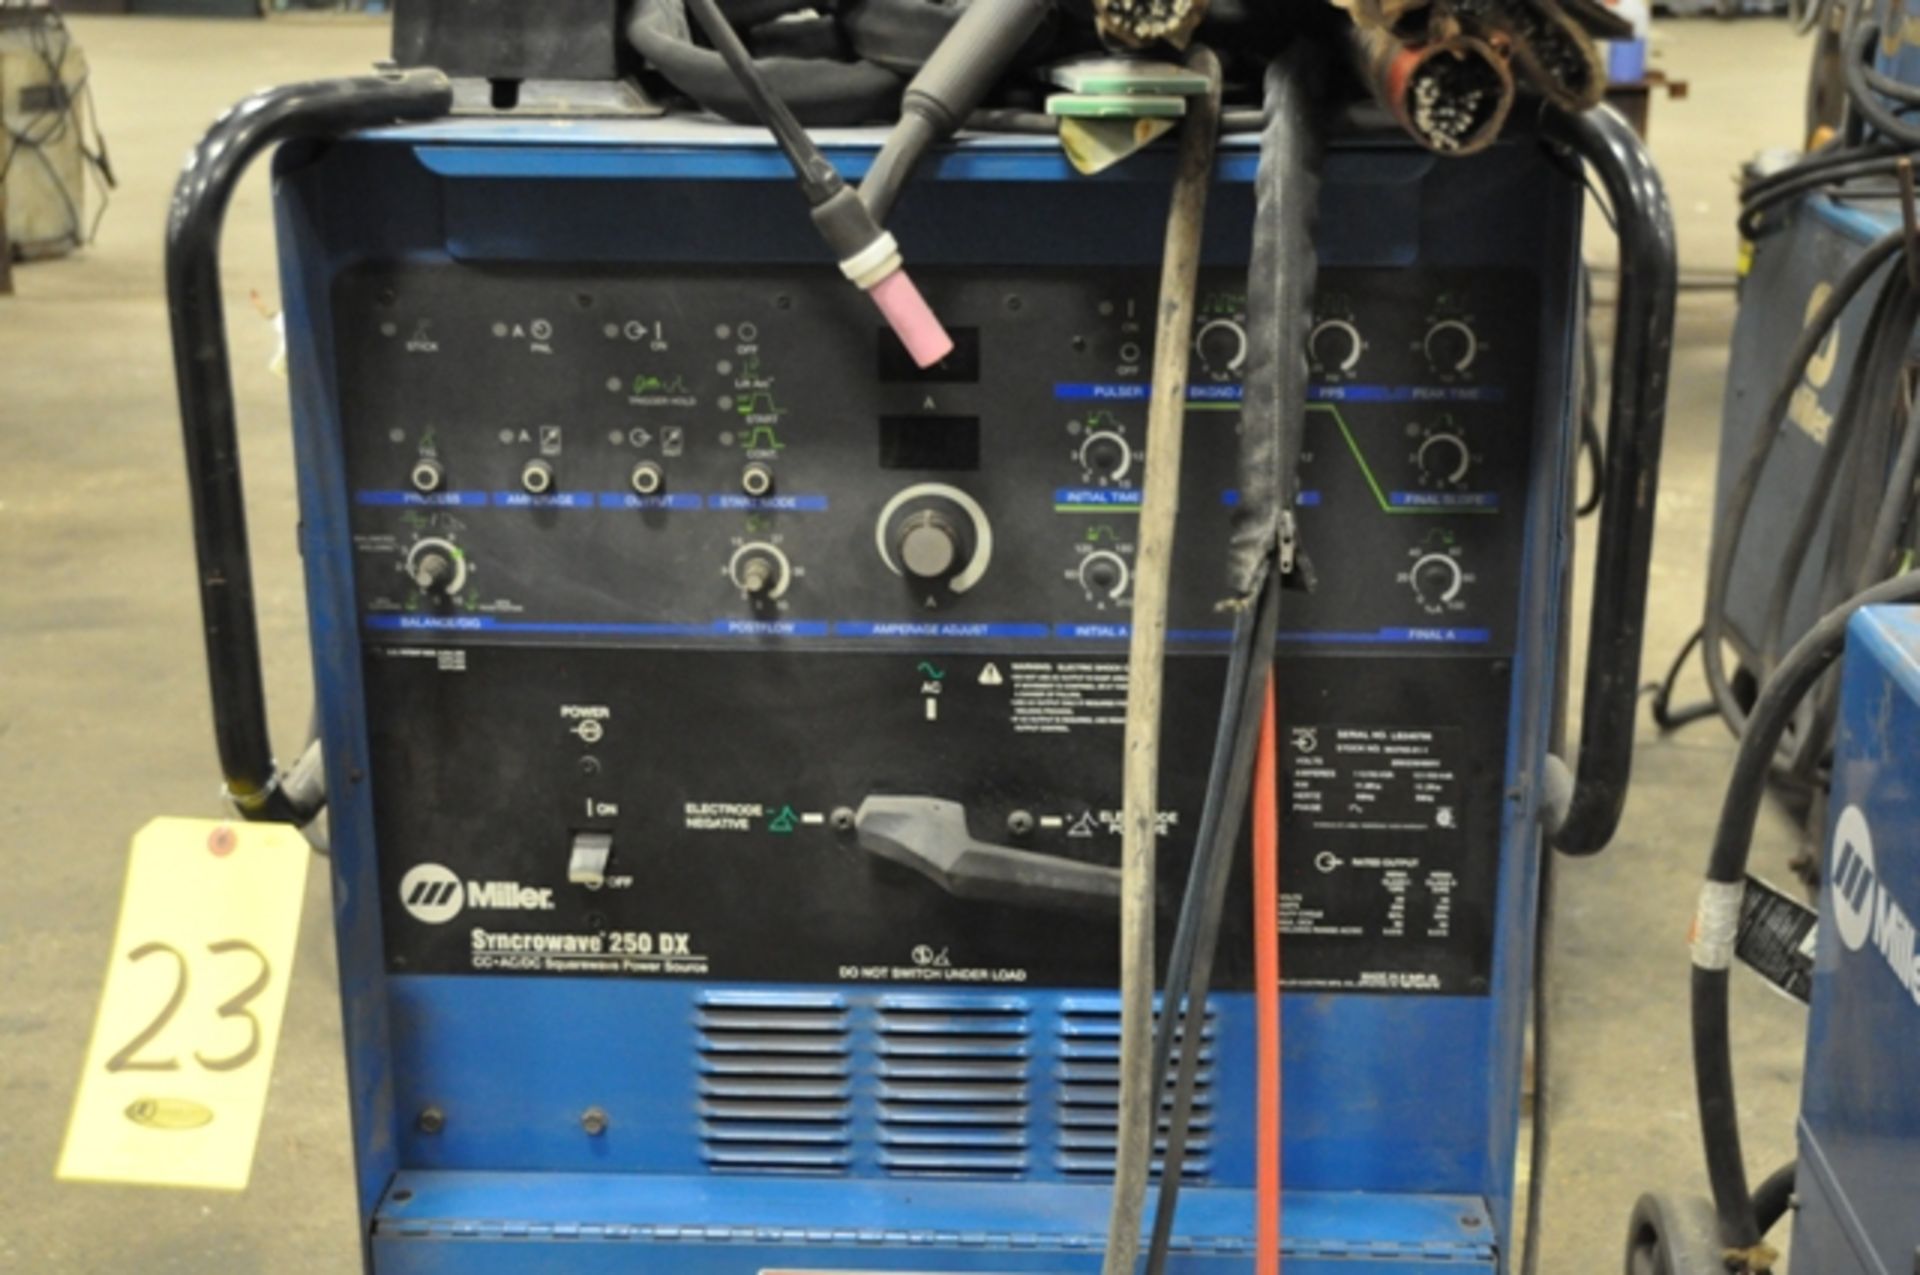 MILLER SYNCRO 250DX TIG WELDER, NEW 2001, SN. LB240786, SINGLE PHASE WITH TIG GUN, WATER COOLER UNIT - Image 5 of 6